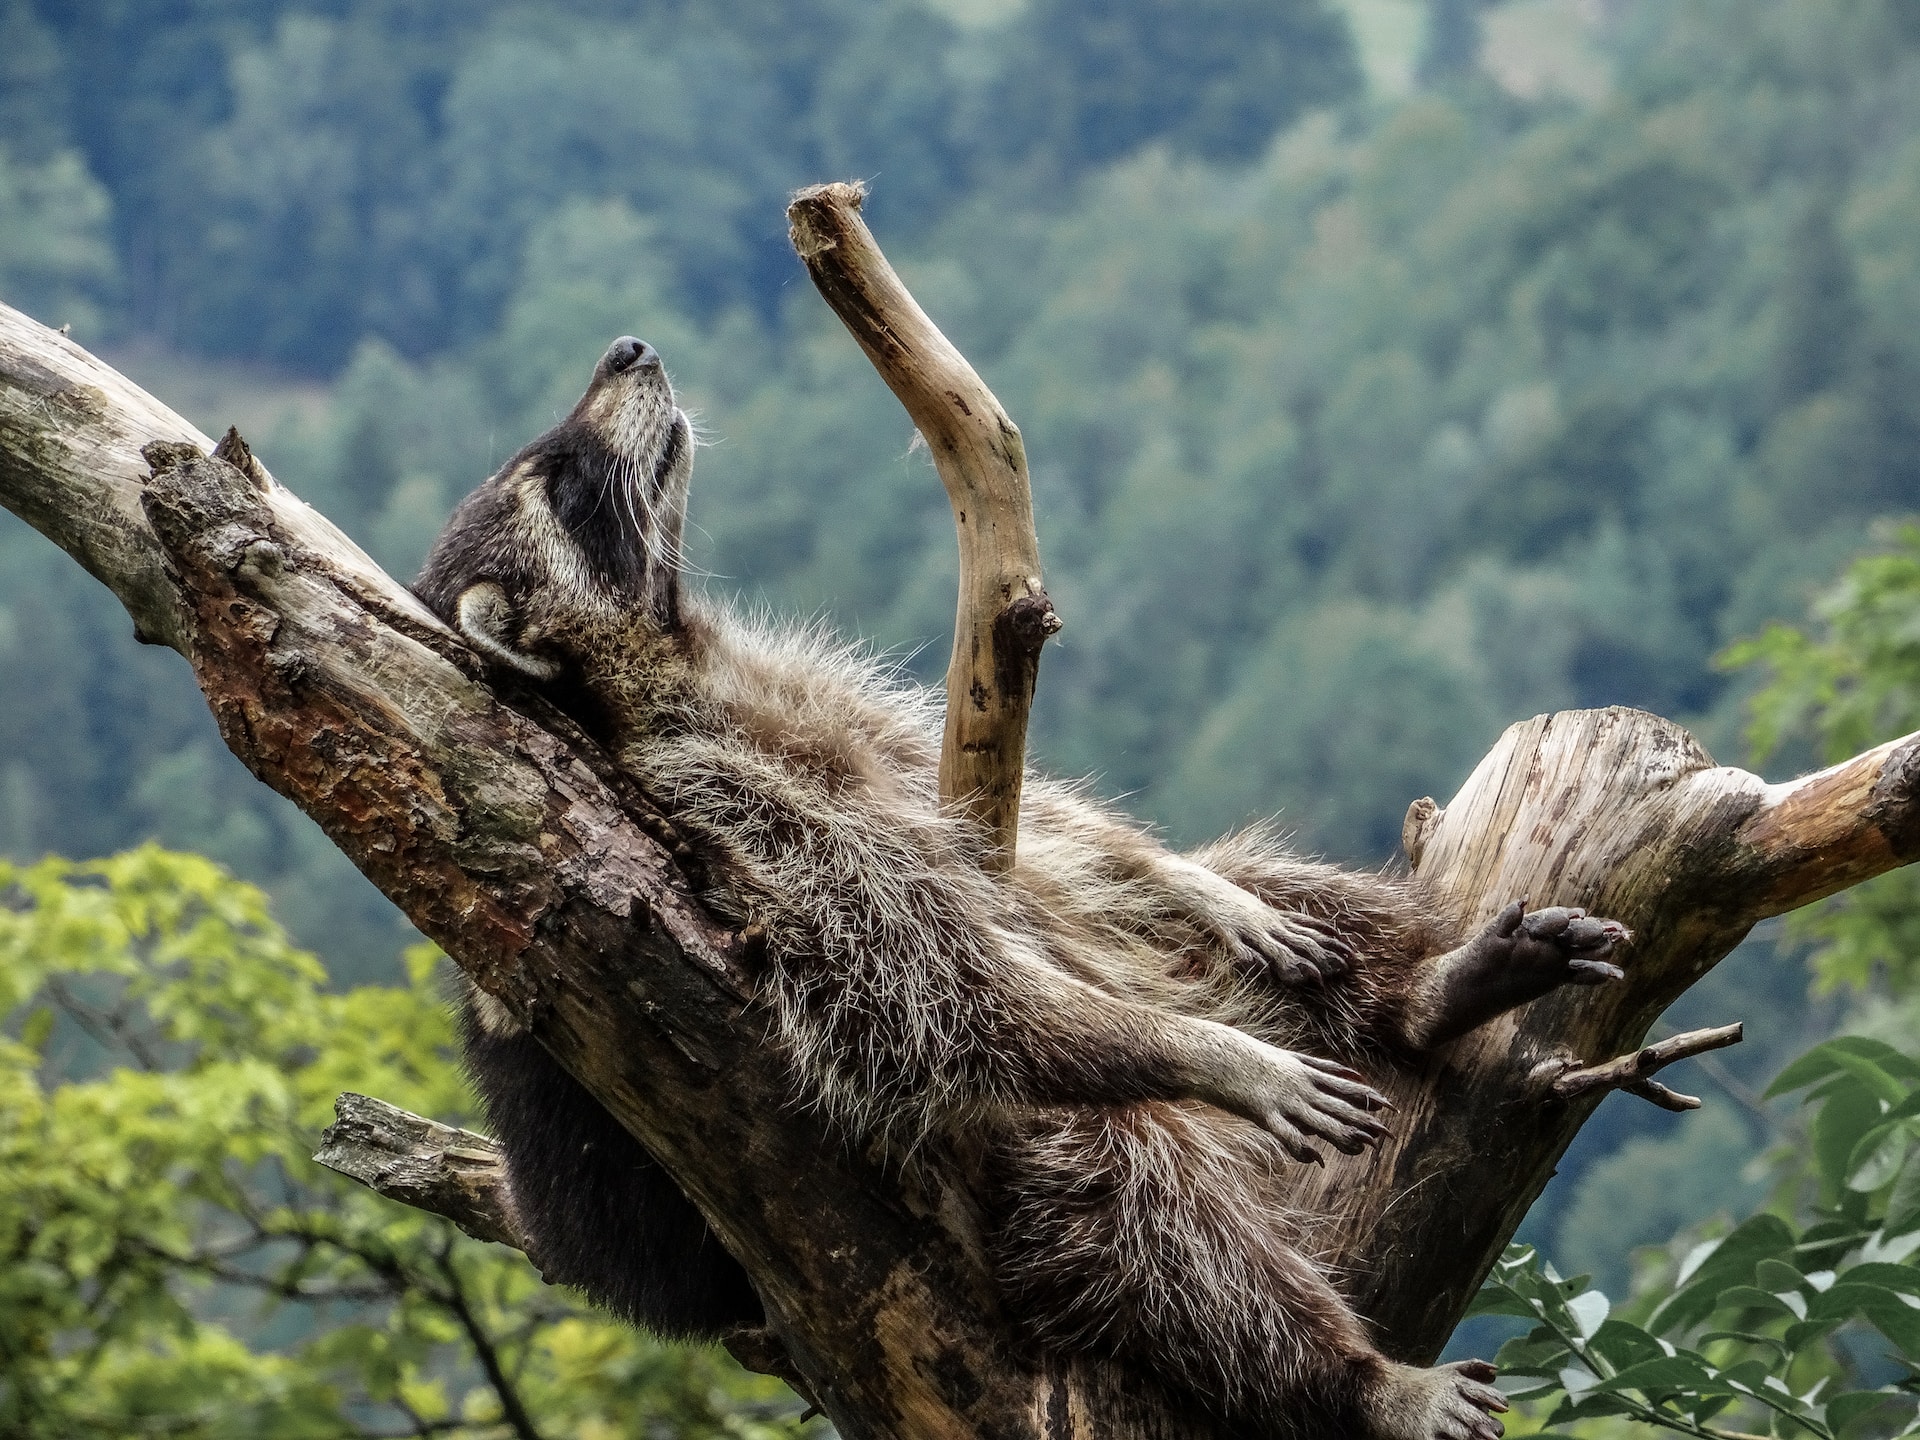 Image features a raccoon sleeping in a tree, illustrating the idea that people want to know what the easiest genre to write is.